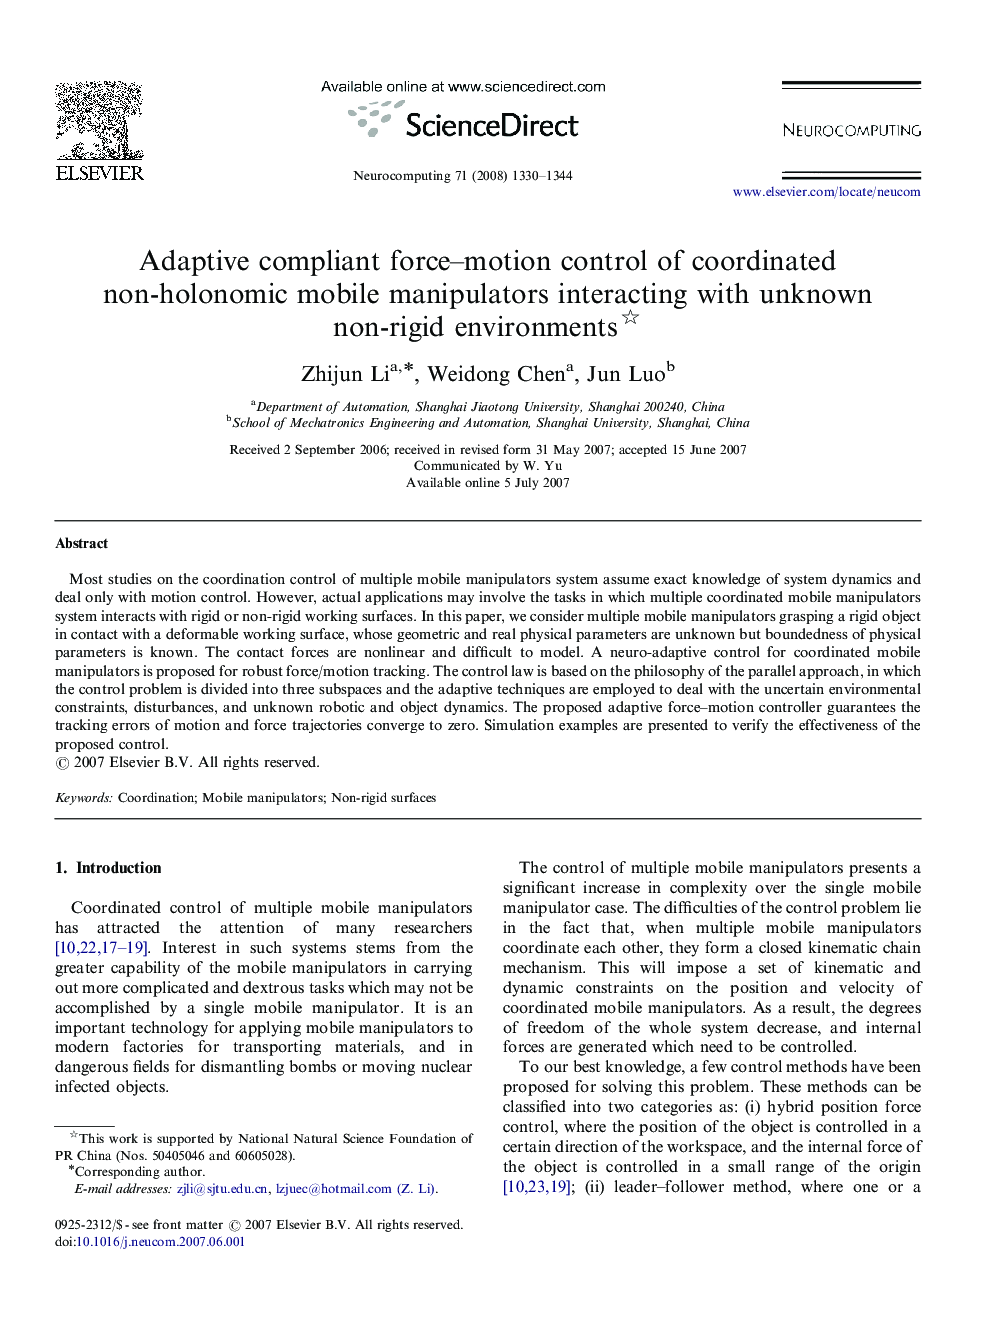 Adaptive compliant force–motion control of coordinated non-holonomic mobile manipulators interacting with unknown non-rigid environments 